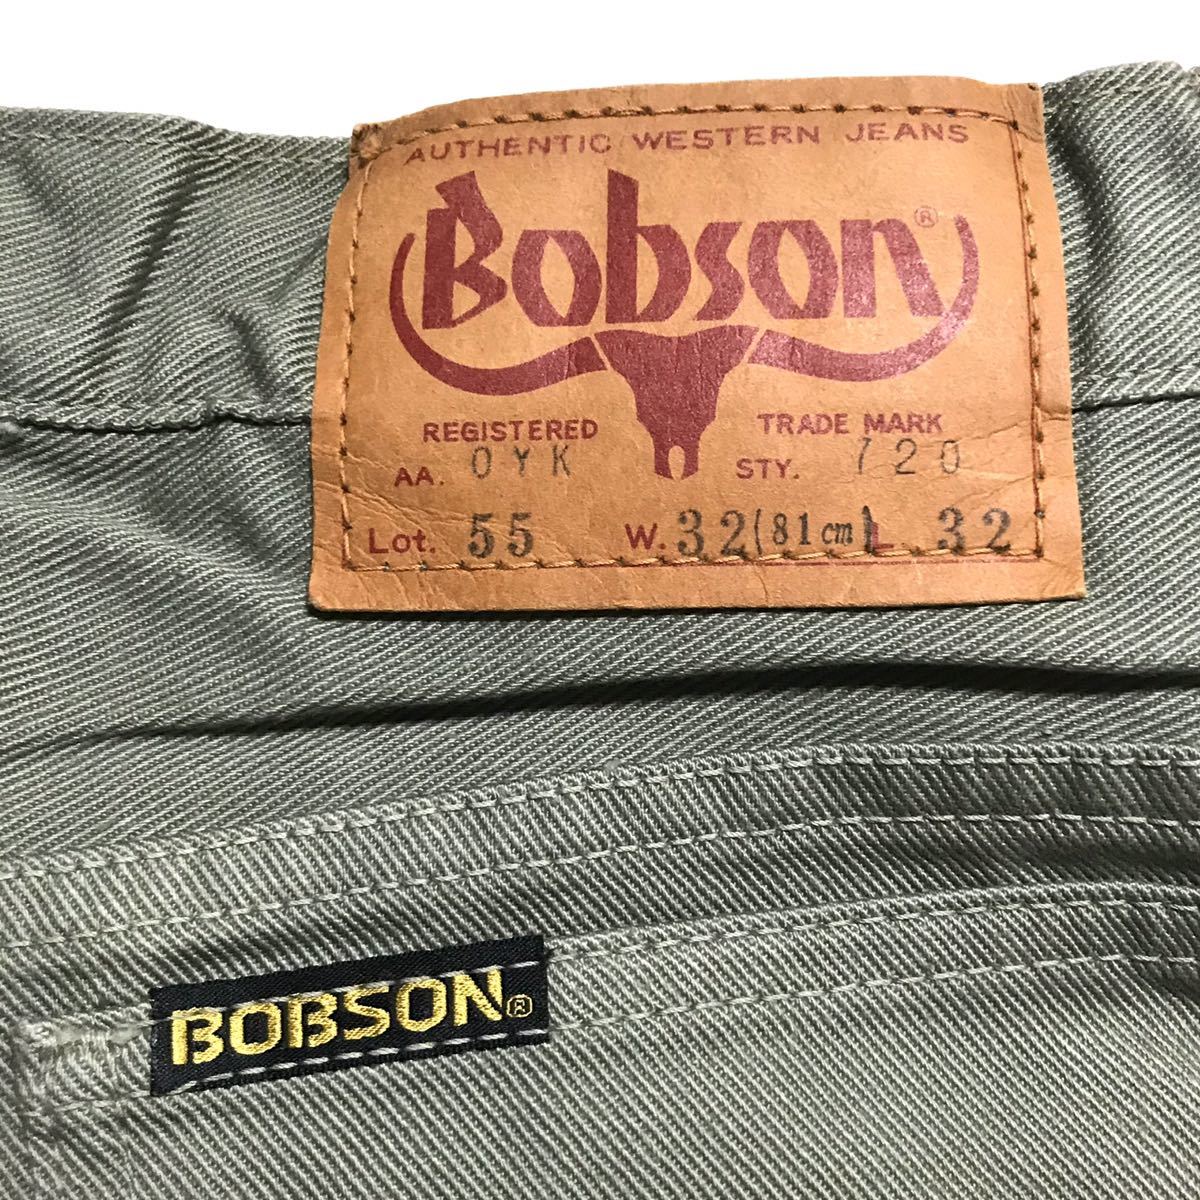 [ dead stock ]70s 80s BOBSON 720 Bobson color jeans W32/81. gray Vintage slim Denim pants made in Japan Okayama records out of production 8